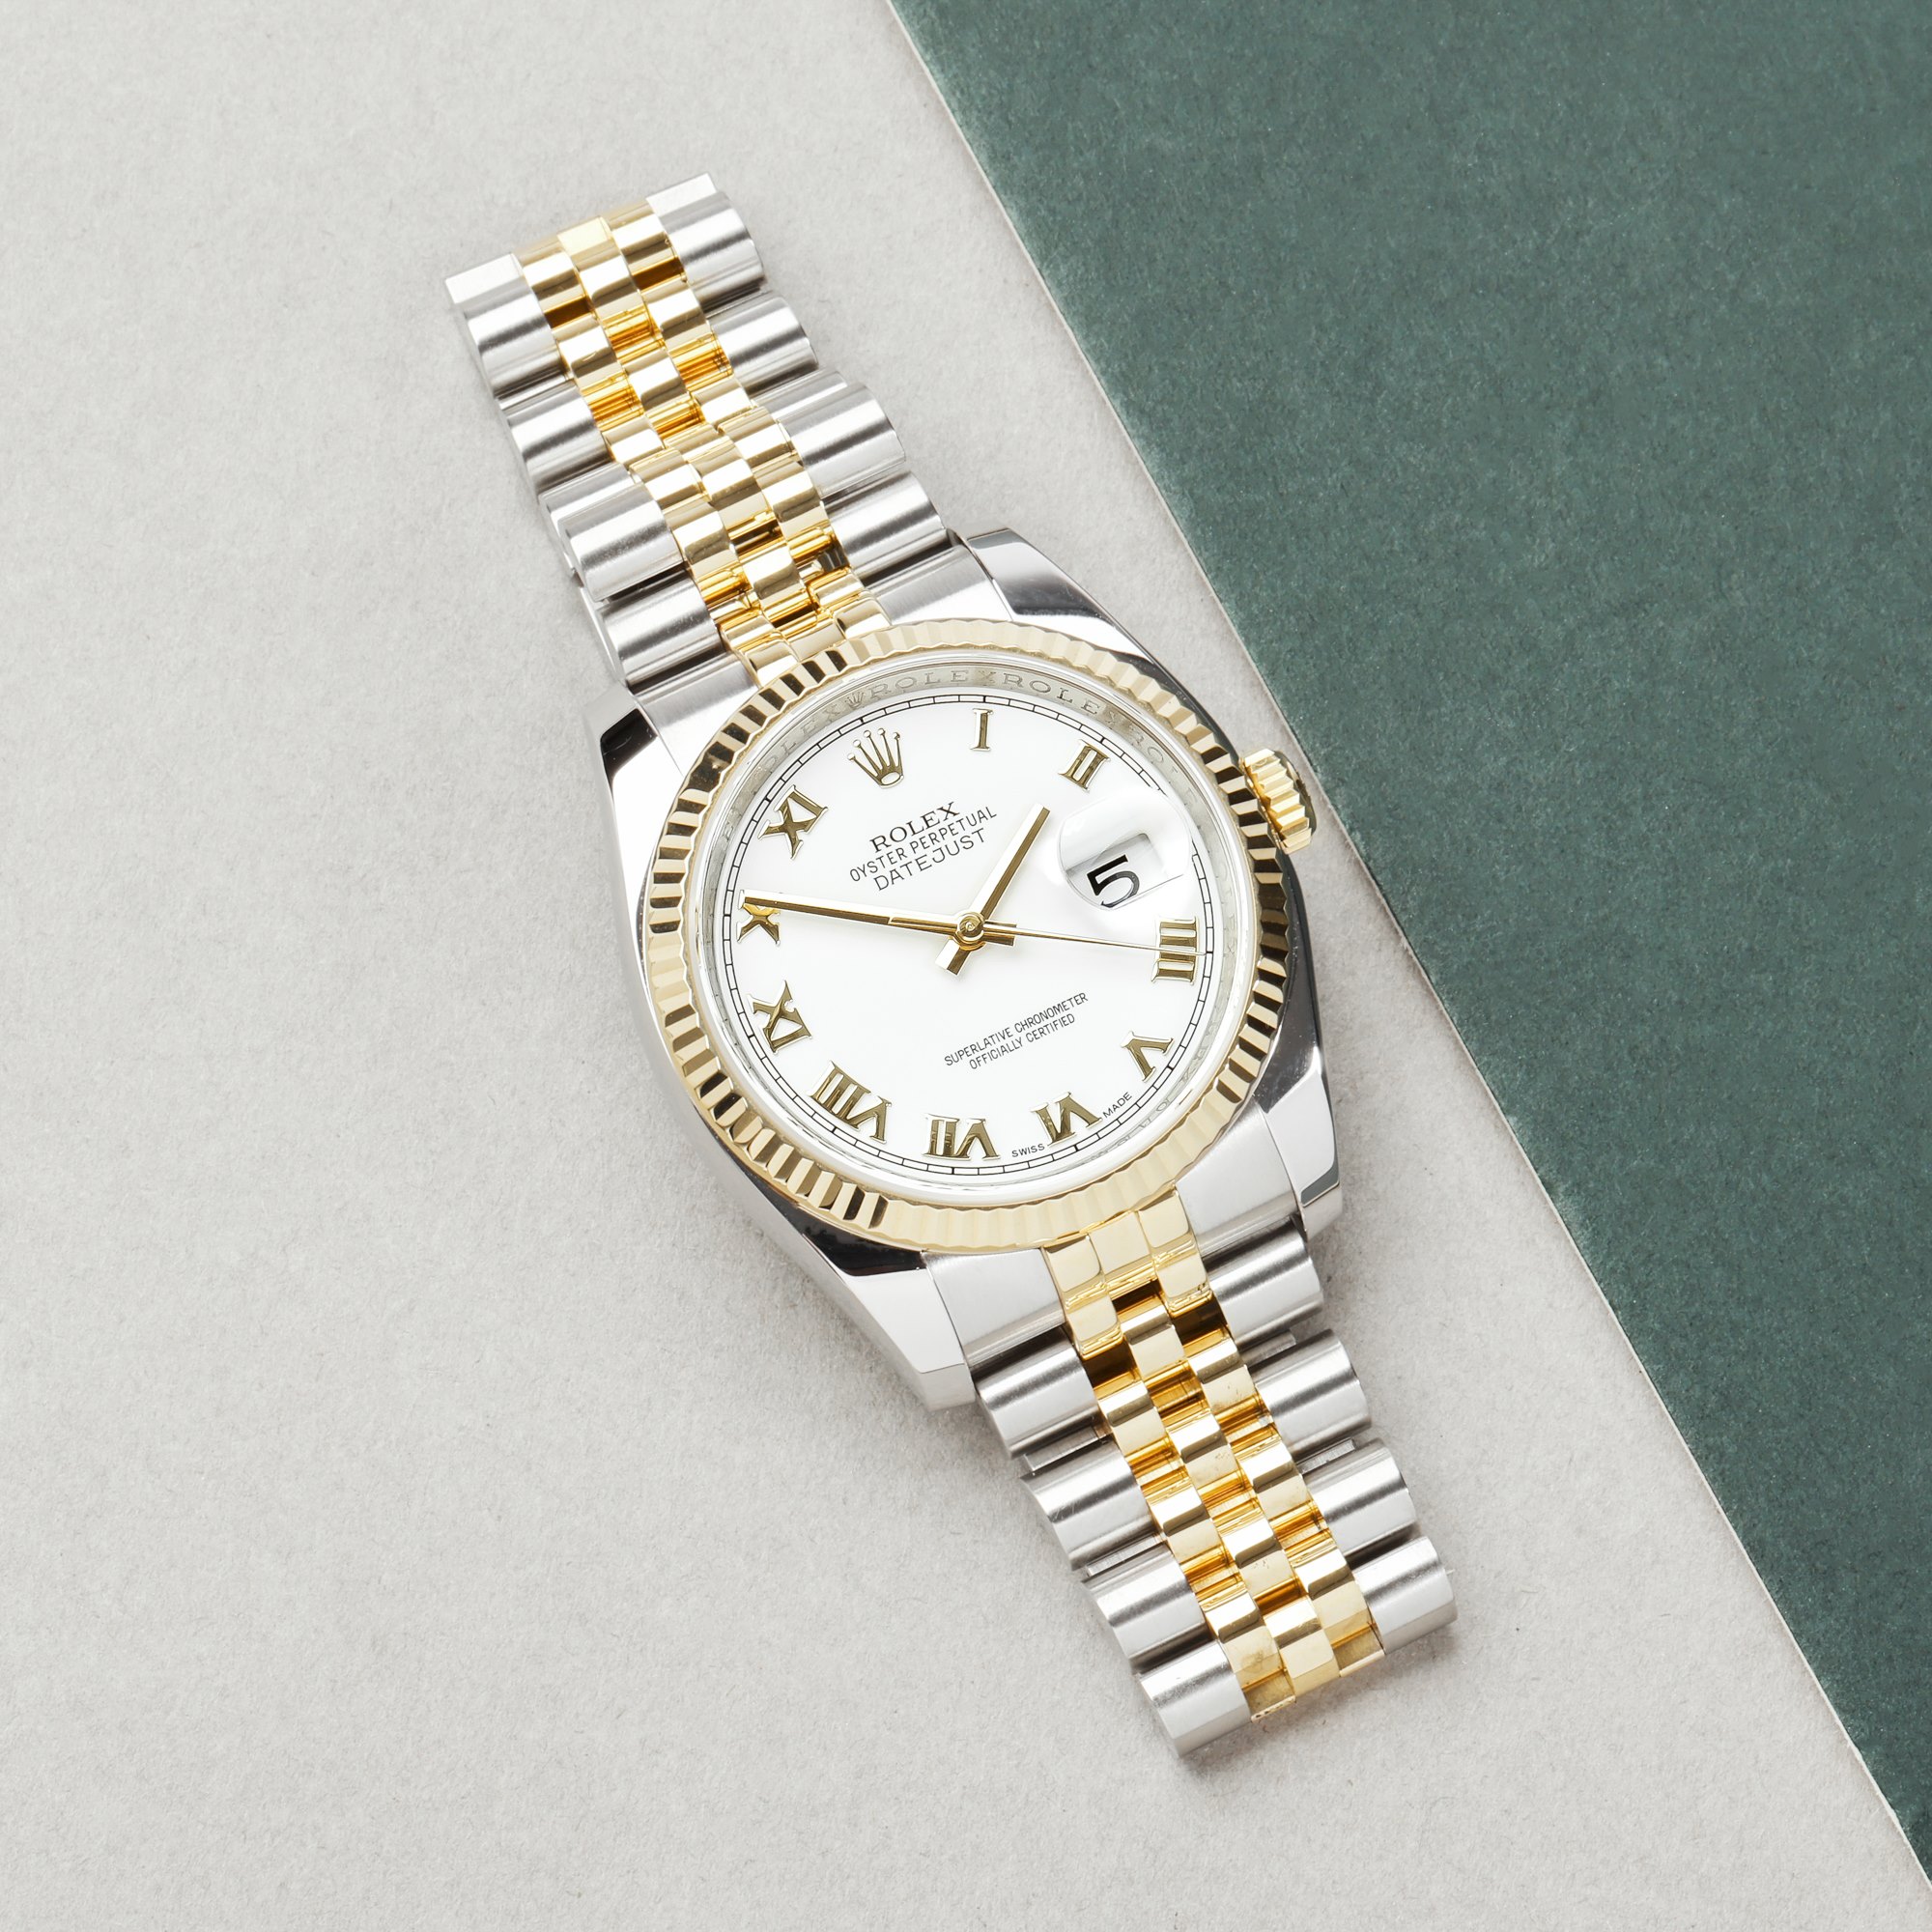 Rolex Datejust Yellow Gold & Stainless Steel 116233